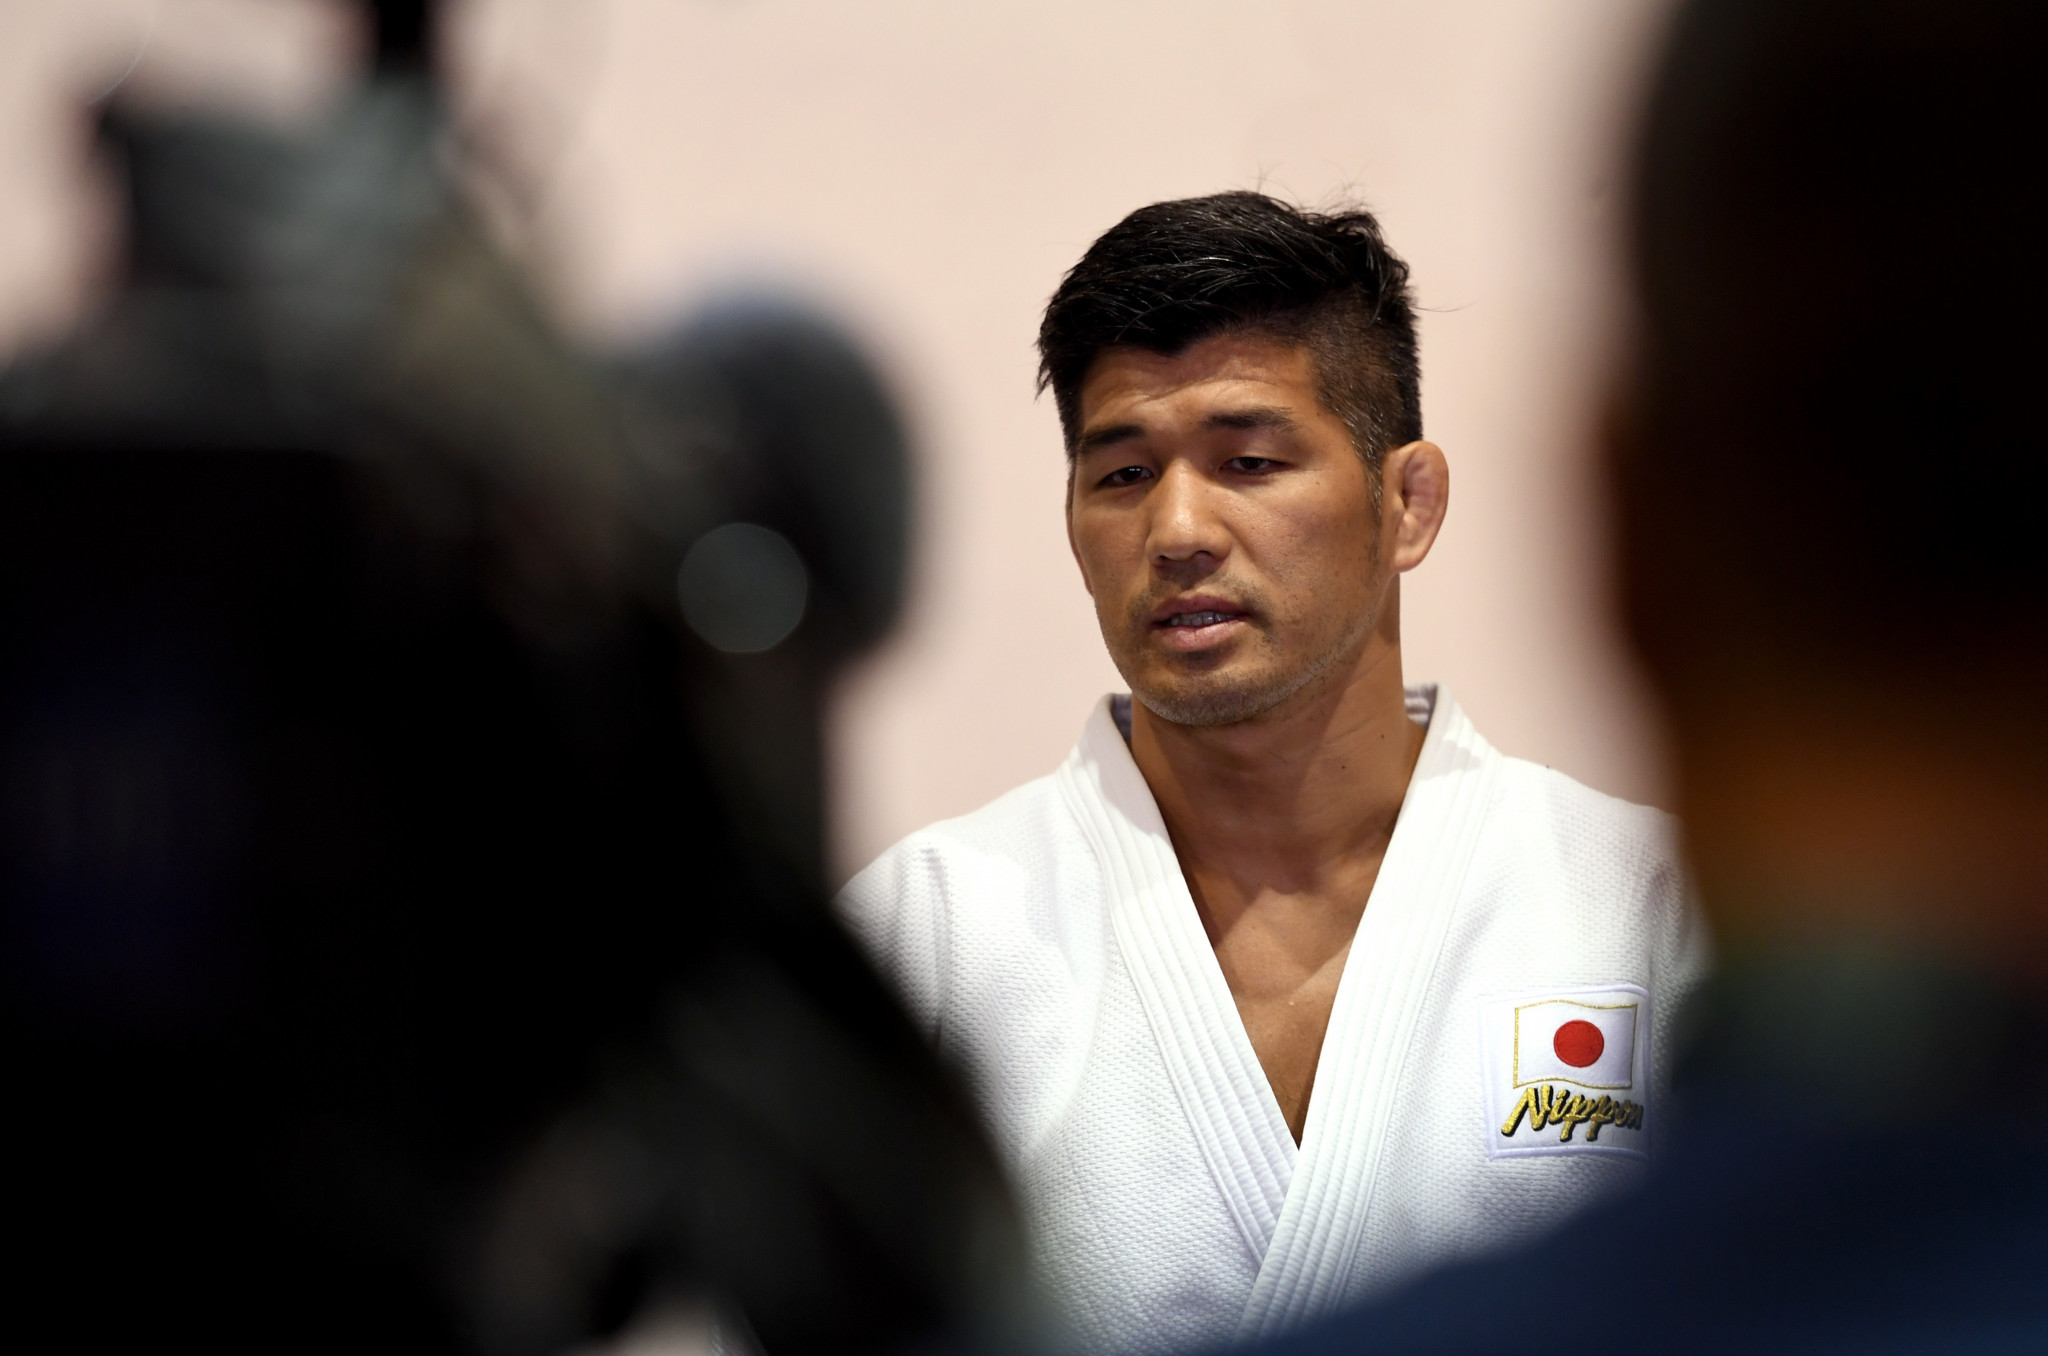 Kosei Inoue guided Japan's men to five out of the seven available gold medals at Tokyo 2020 ©Getty Images